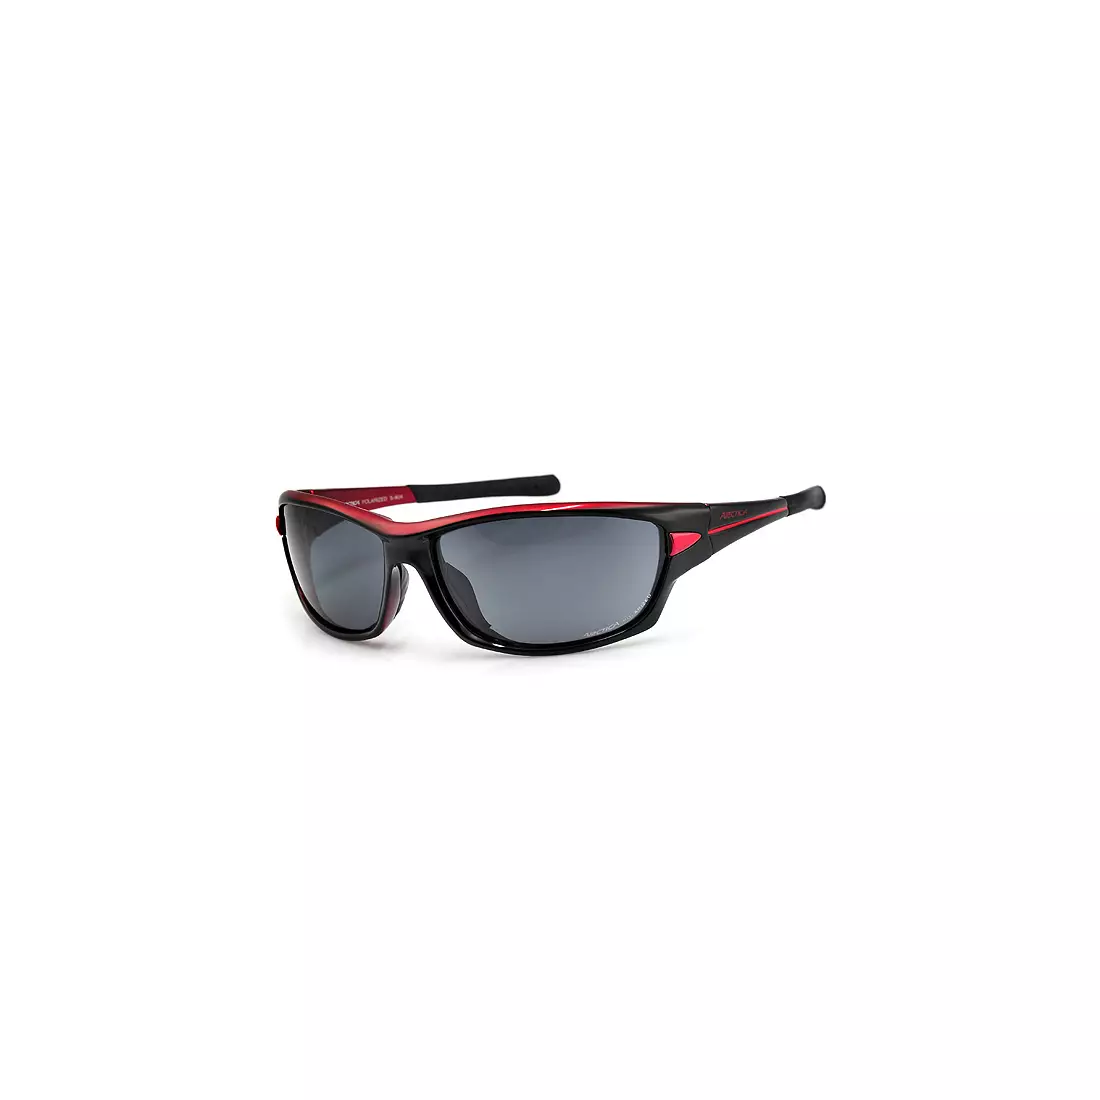 ARCTICA sports glasses S-90A - color: Black and red